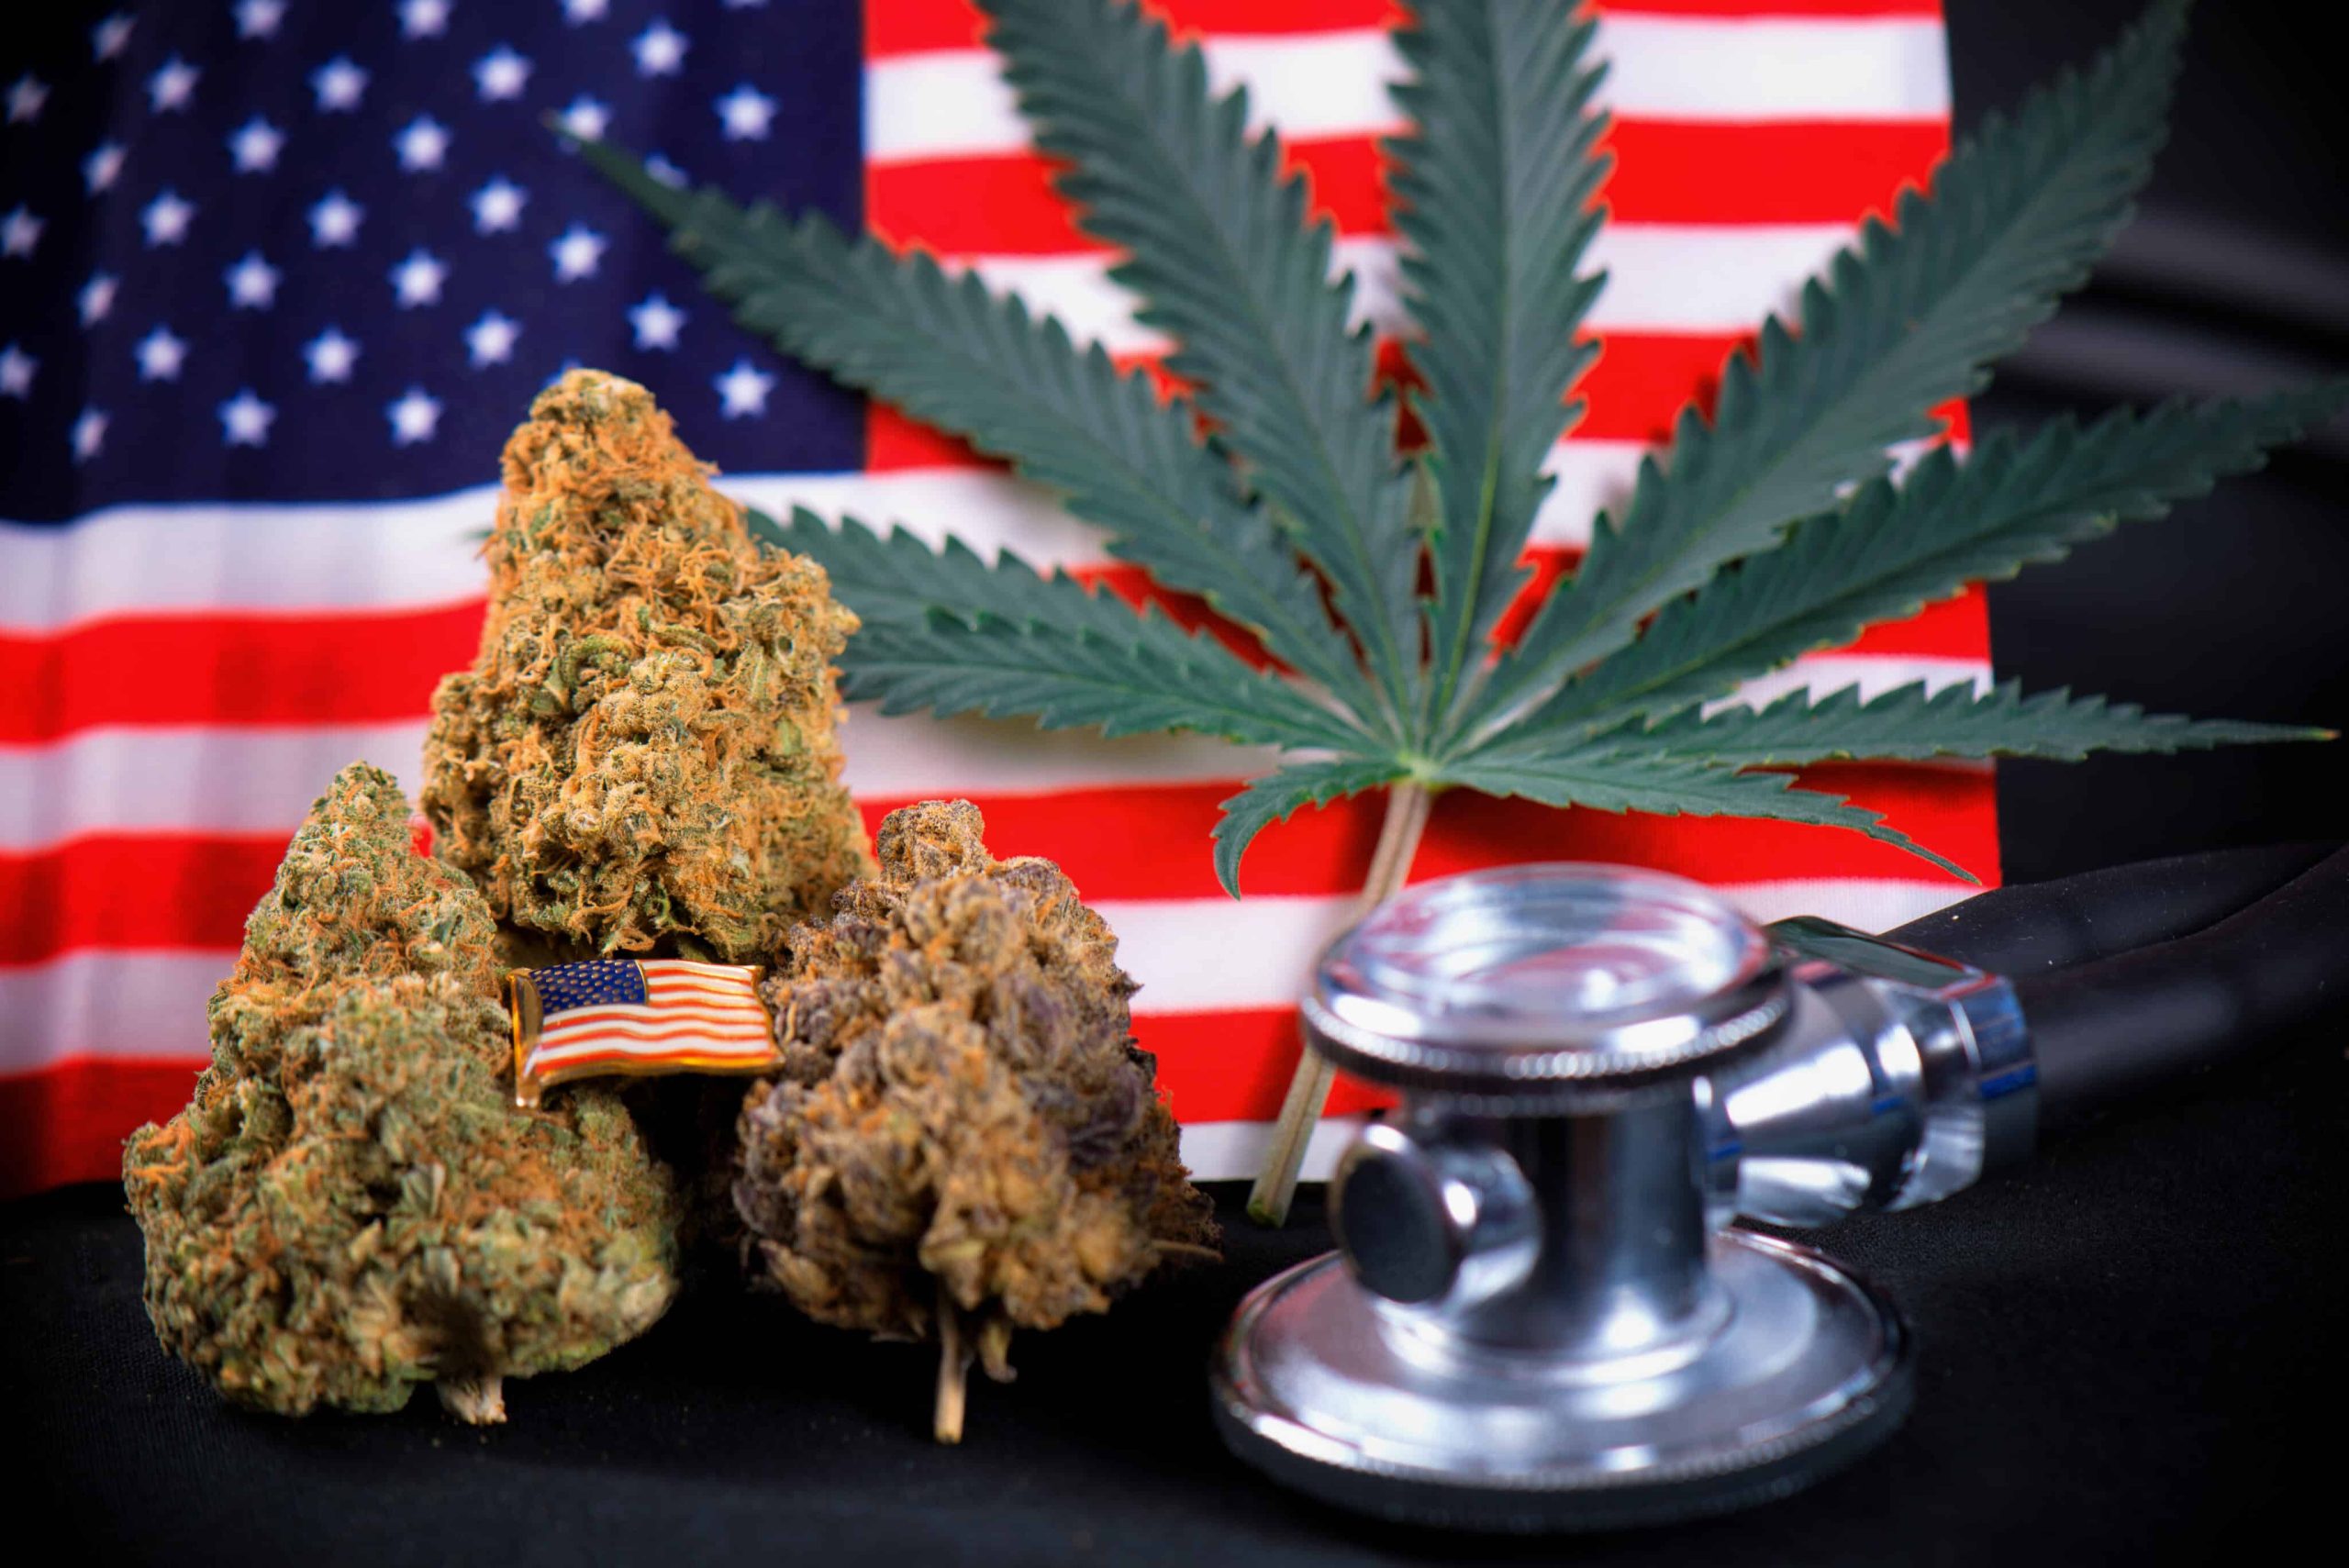 Senate Committee Approves Bill Allowing VA To Recommend Pot to Veterans in Legal States